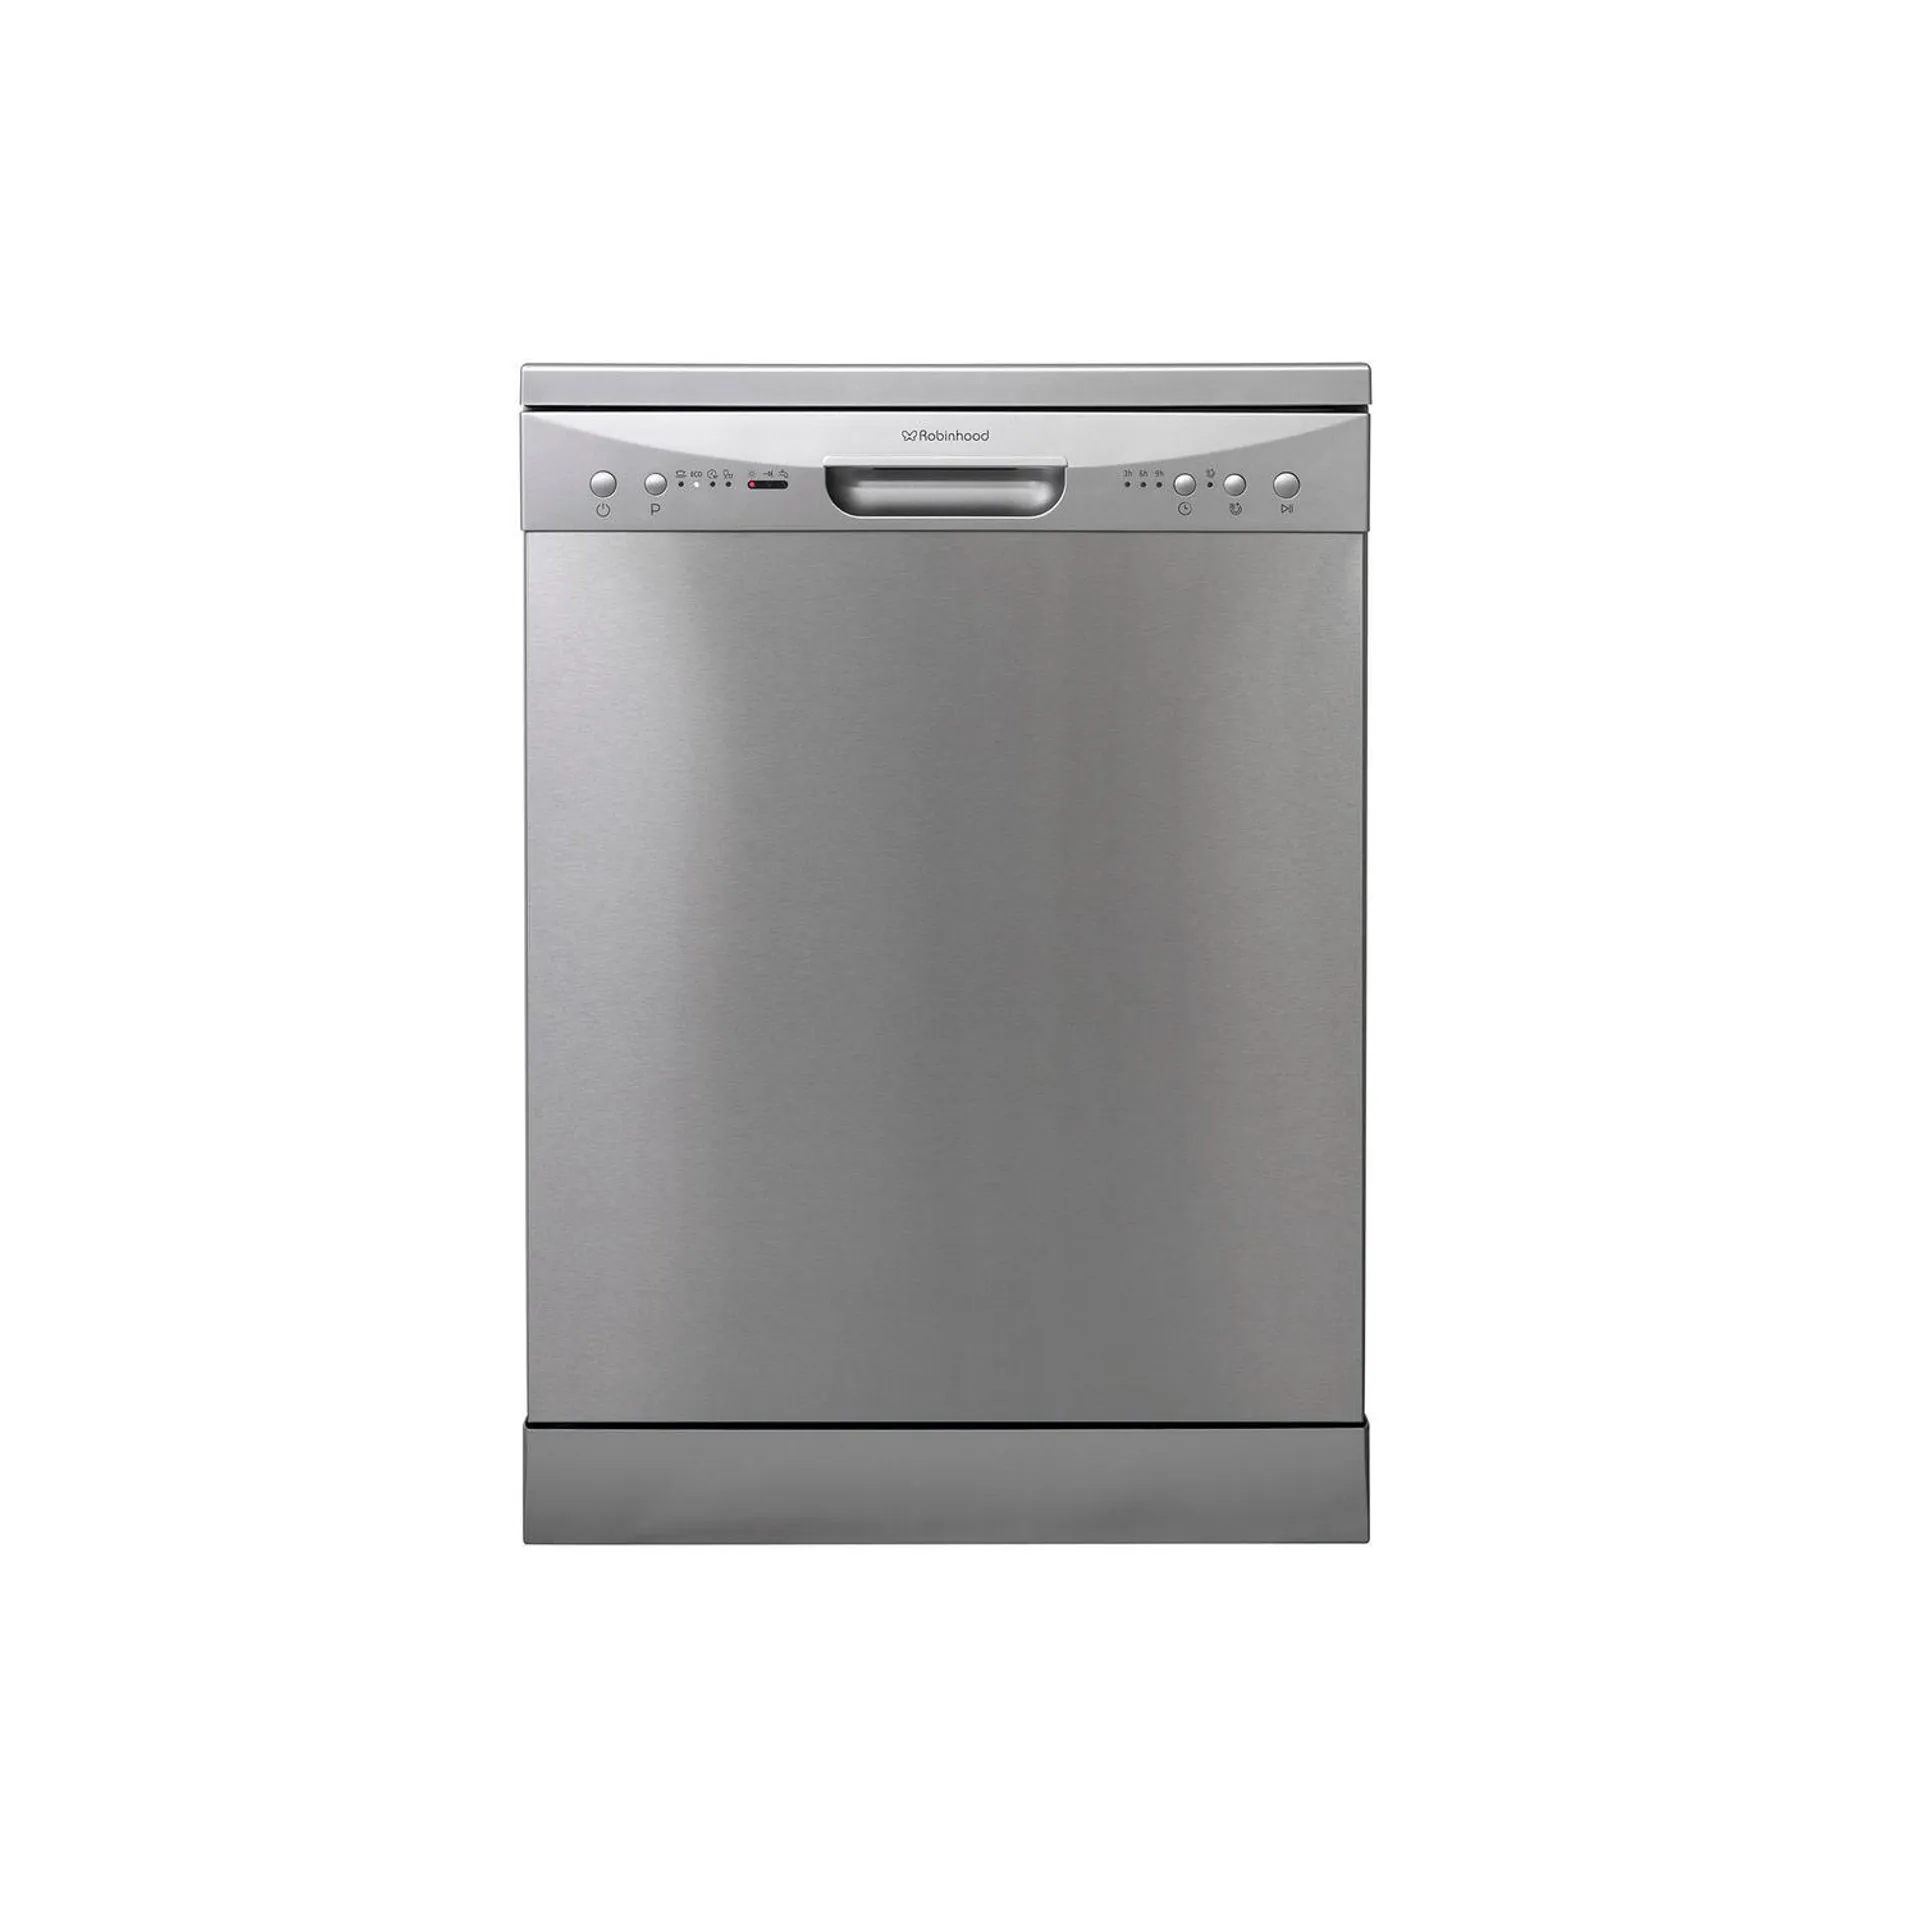 Freestanding Dishwasher 12 Place Settings Stainless Steel